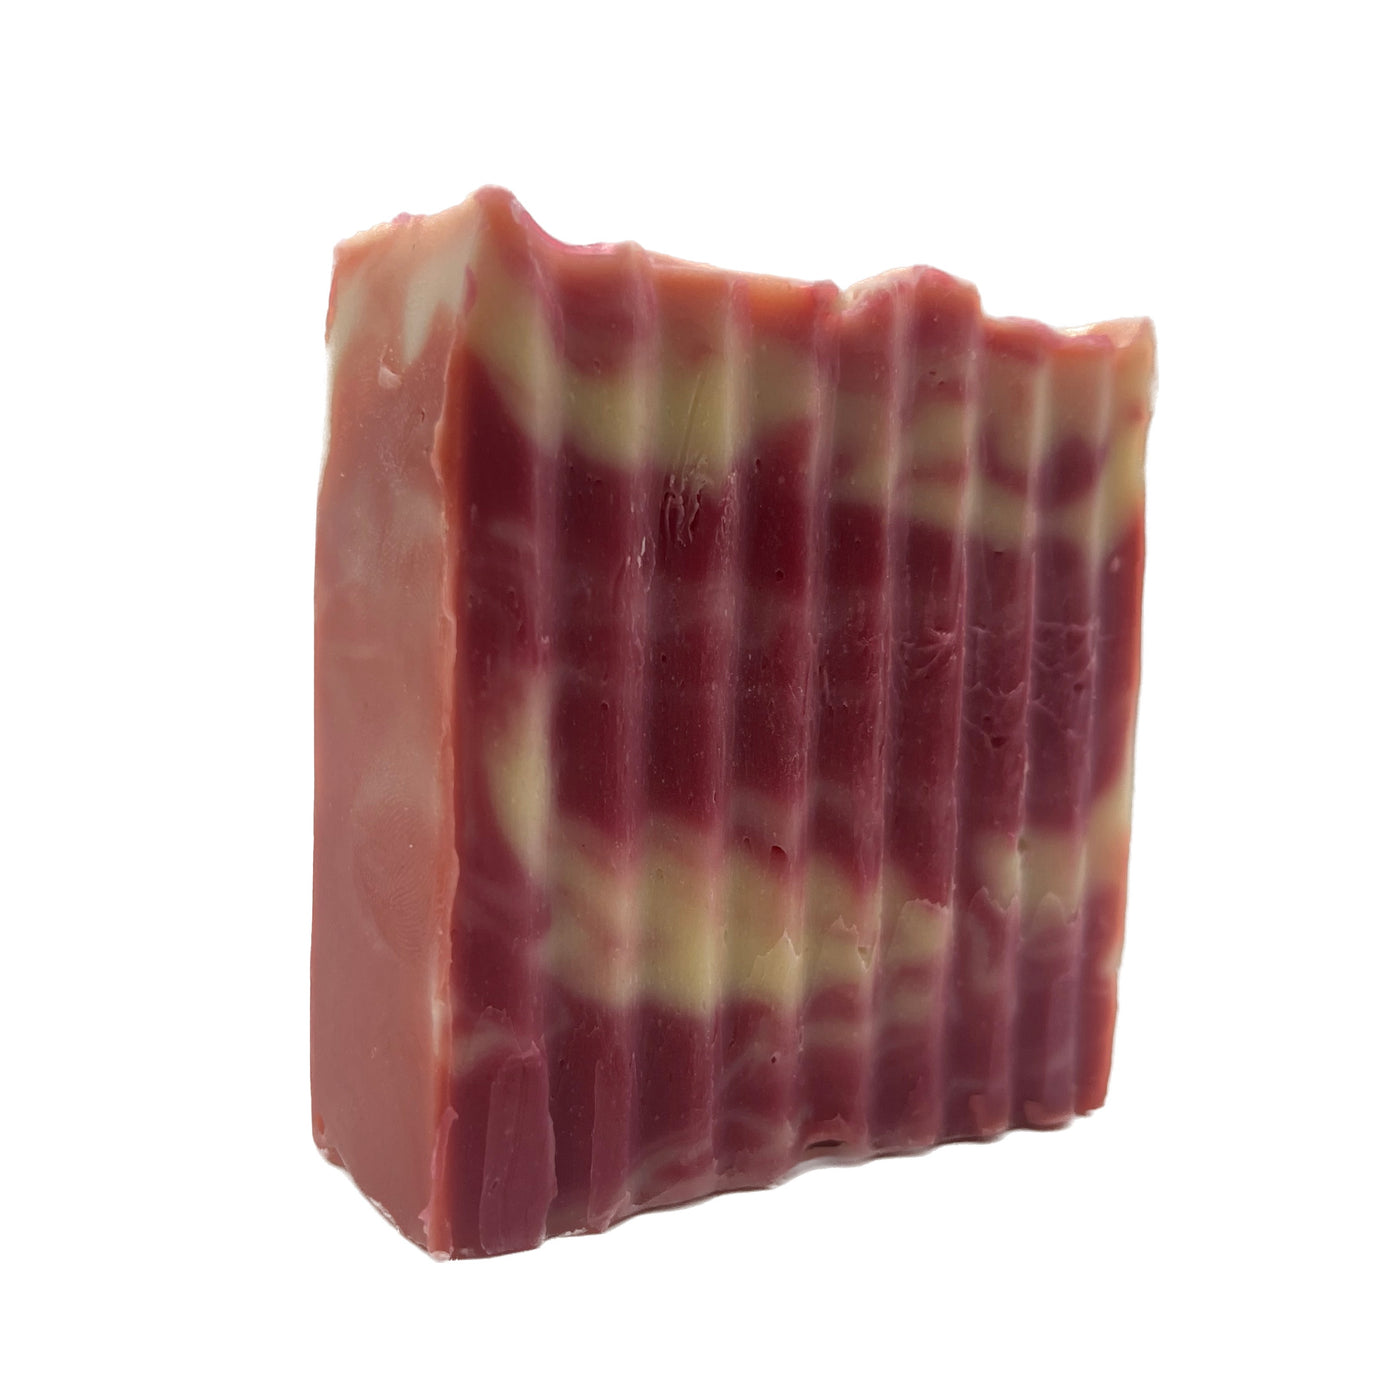 Candy cane soap